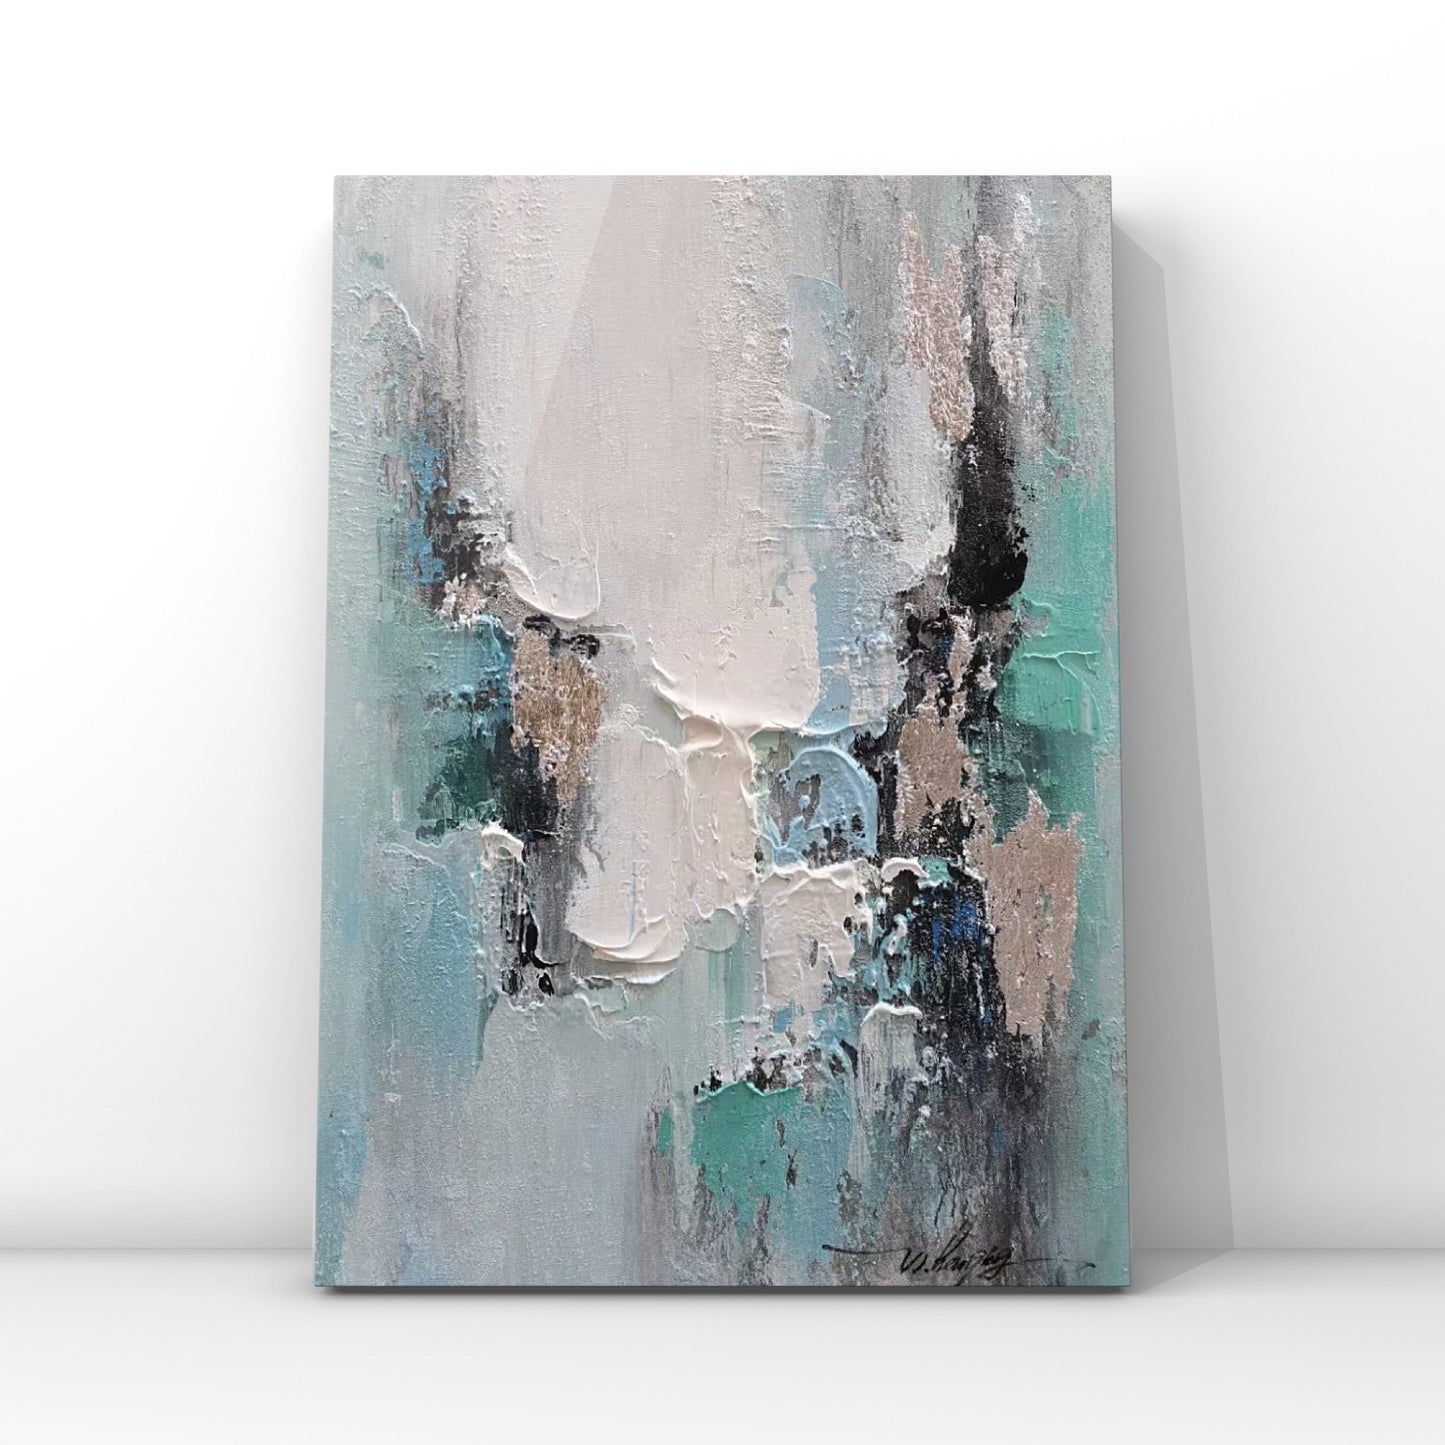 ABSTRACT PAINTING,MOUNTAIN HILL, HAND-PAINTED CANVAS